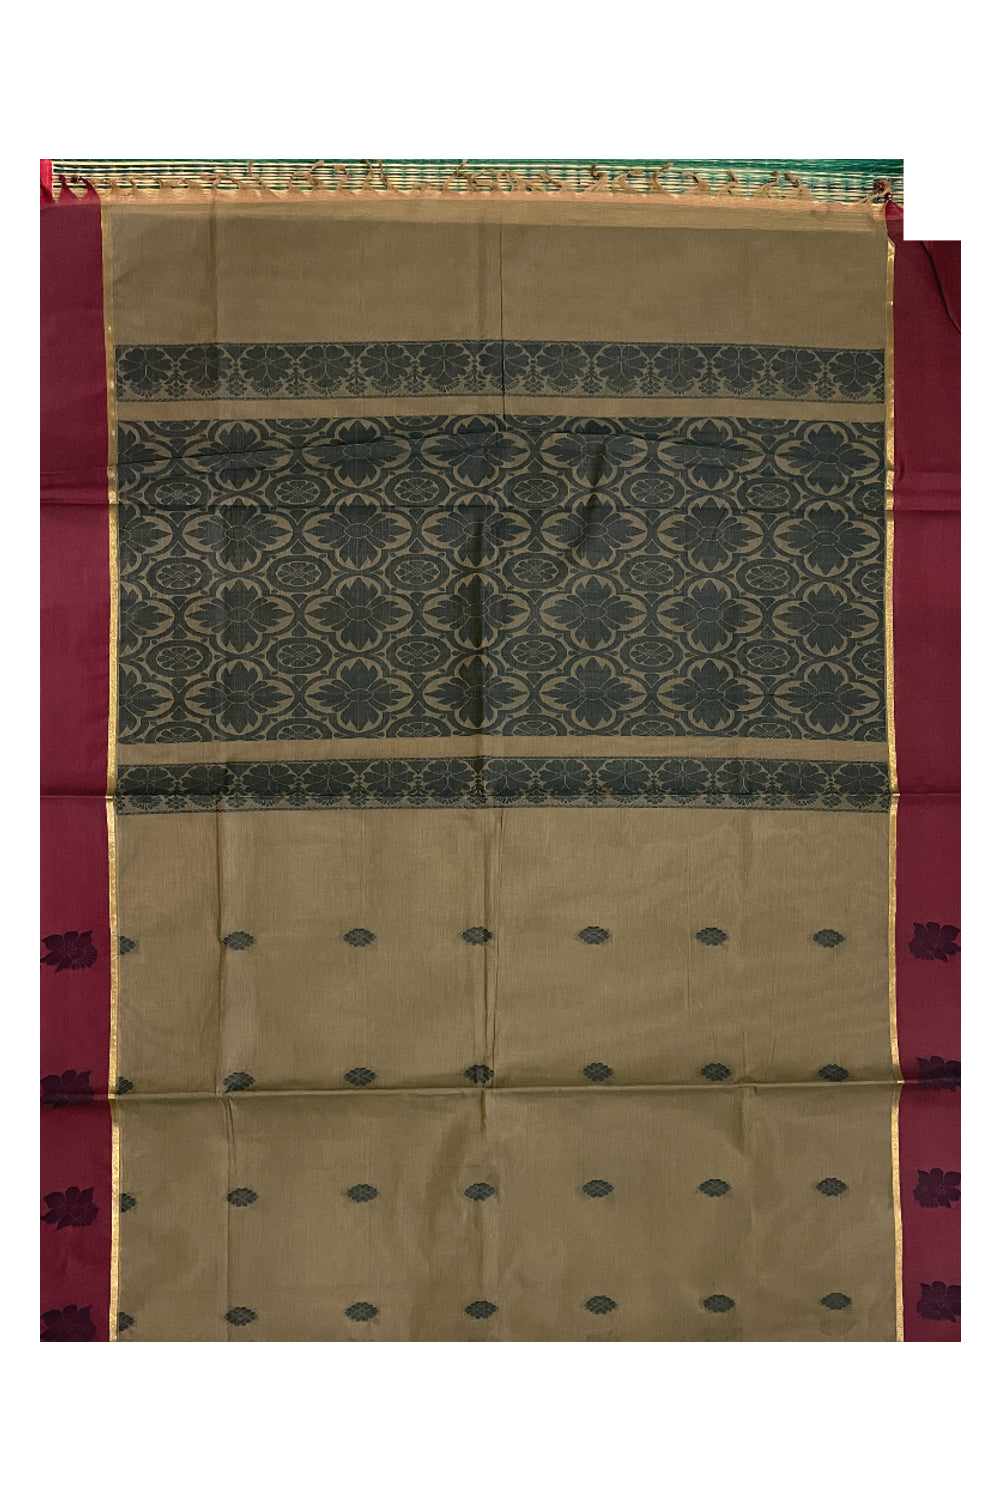 Southloom Cotton Brown Saree with Maroon Floral Woven Border